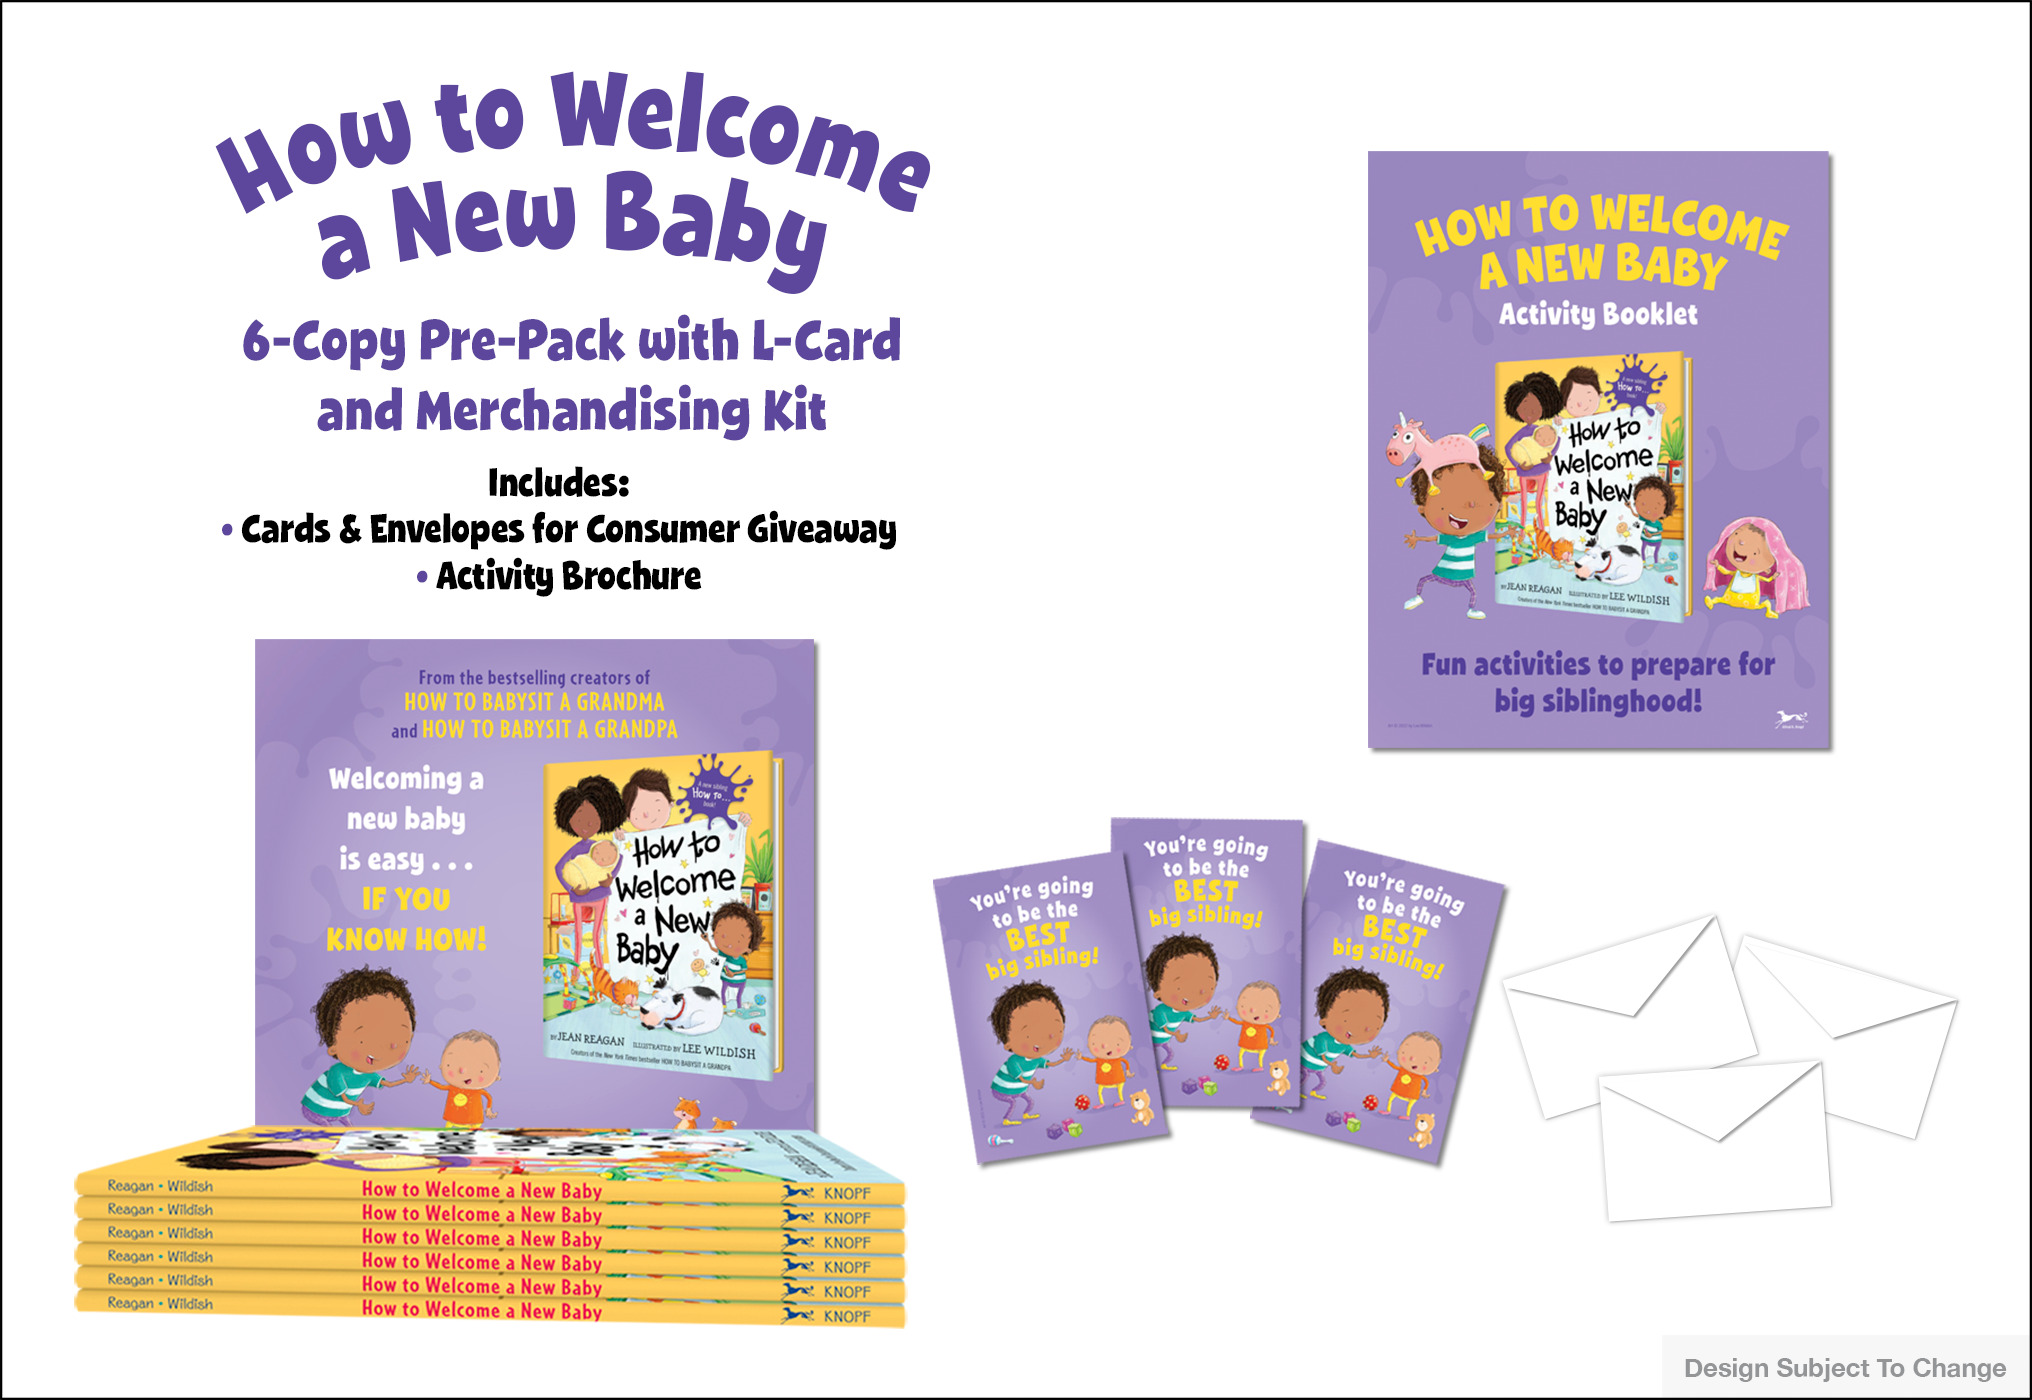 How to Welcome a New Baby 6-Copy Pre-Pack with L-Card and Merchandising Kit | Reagan, Jean